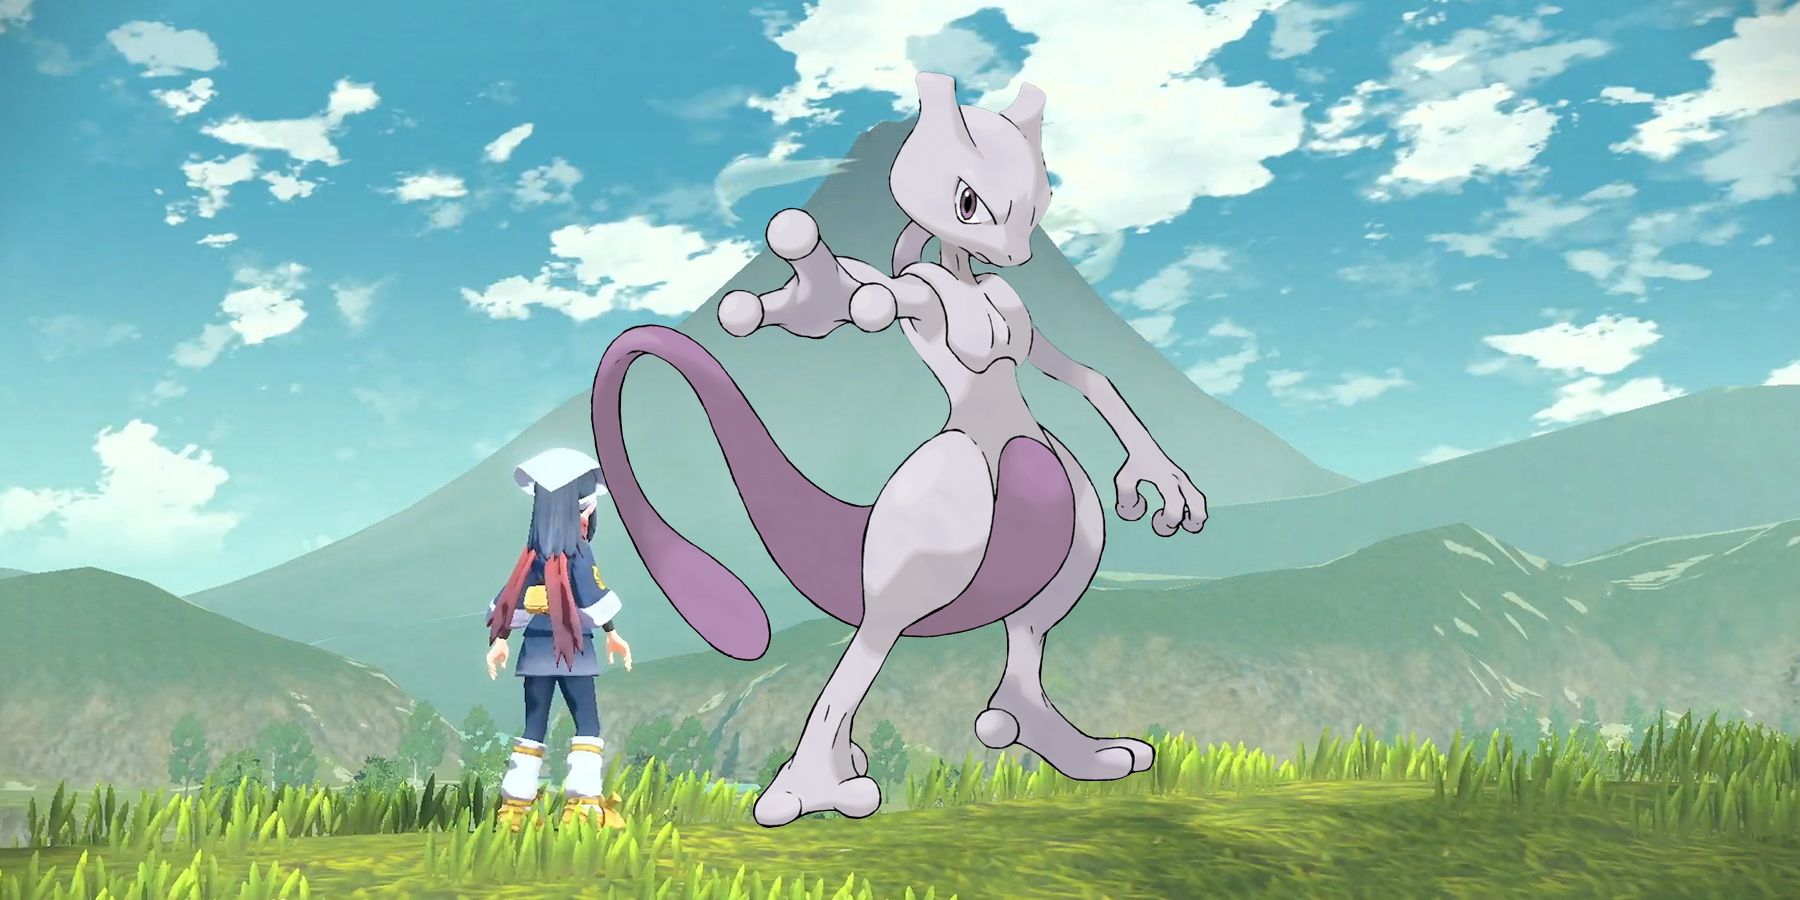 Pokemon Legends Arceus Including Mewtwo Would Open a Big Plot Hole